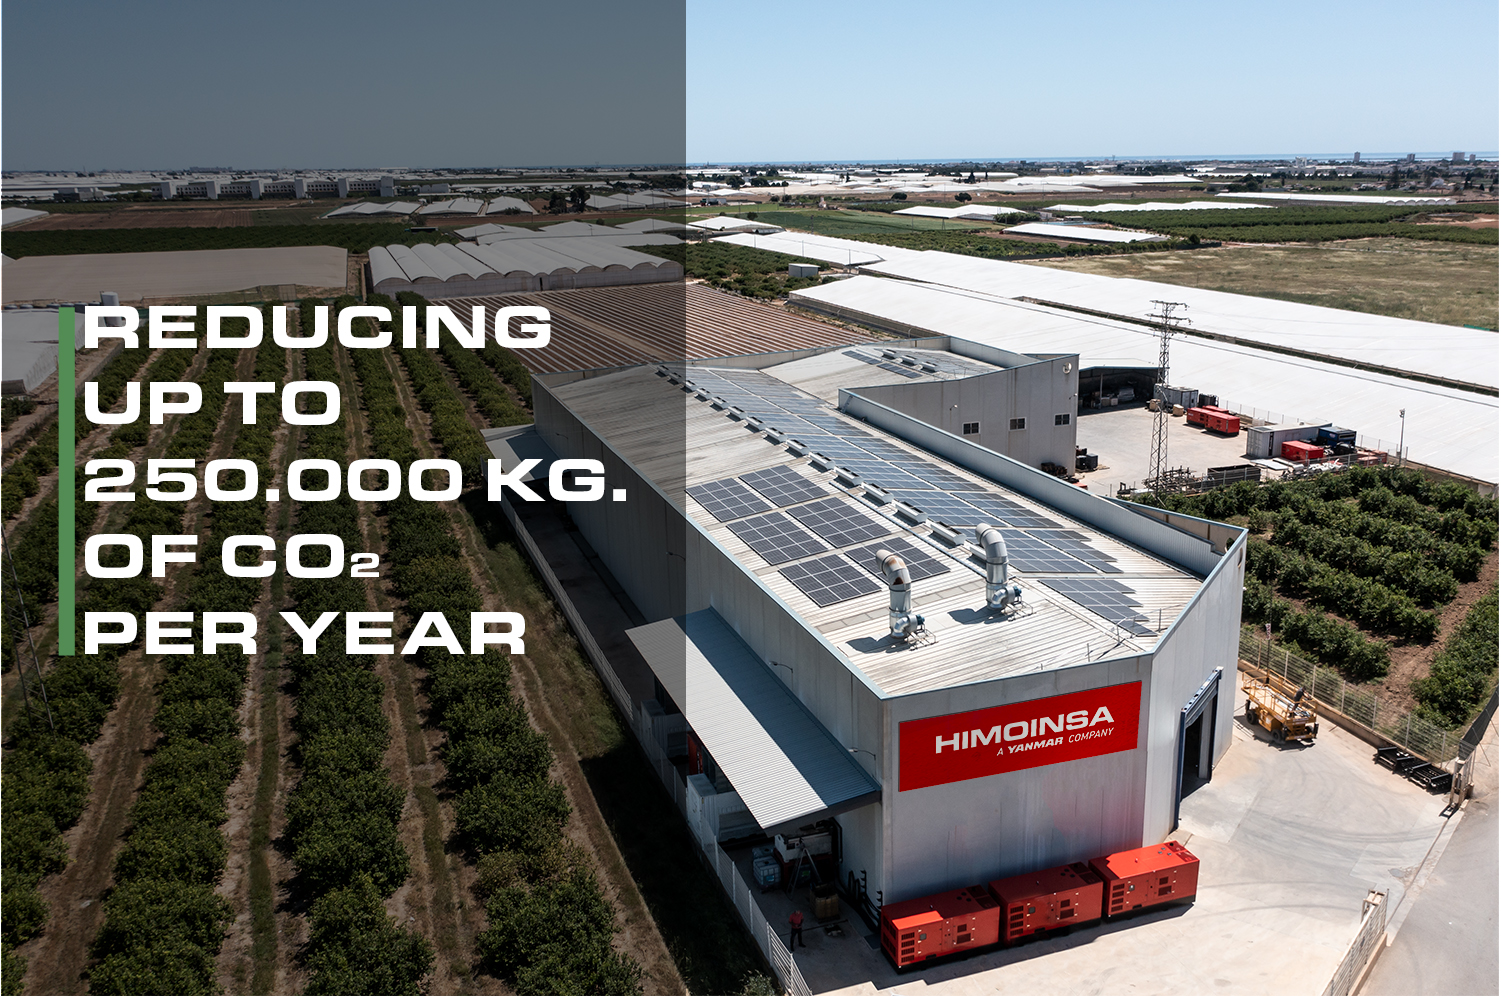 As part of its commitment to energy efficiency in its production processes, HIMOINSA has installed photovoltaic plants in its factories